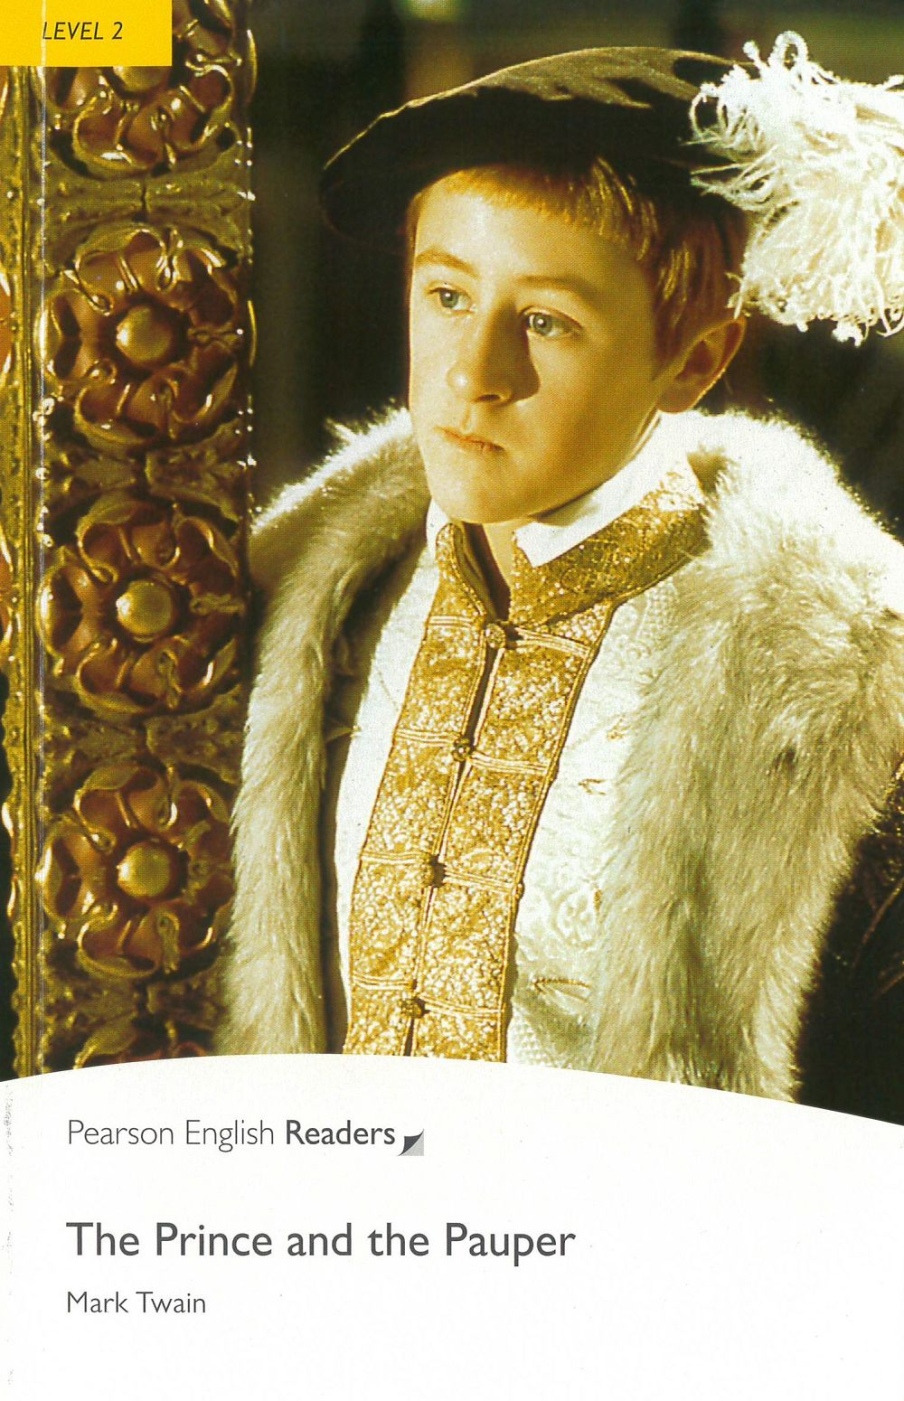 Pearson English Readers Level 2: The Prince and the Pauper